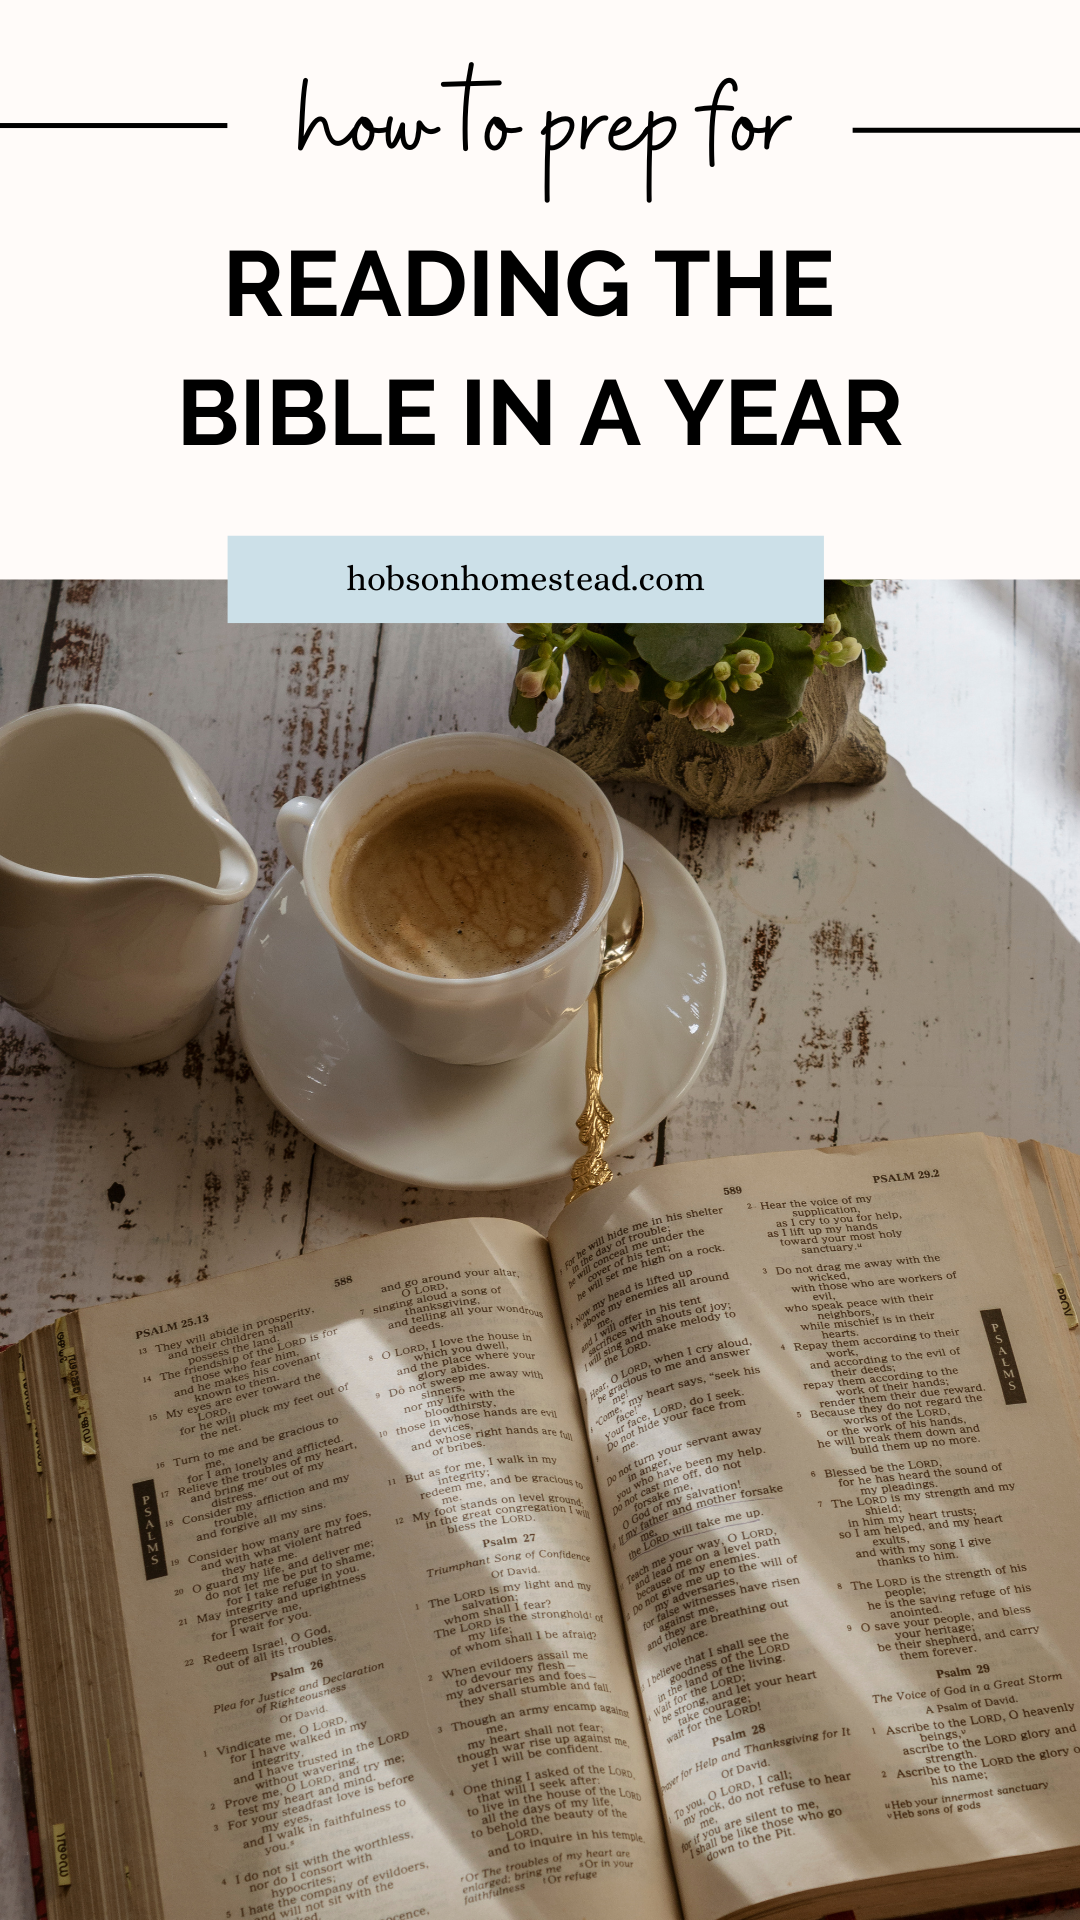 How to Prep for Reading the Bible in a Year